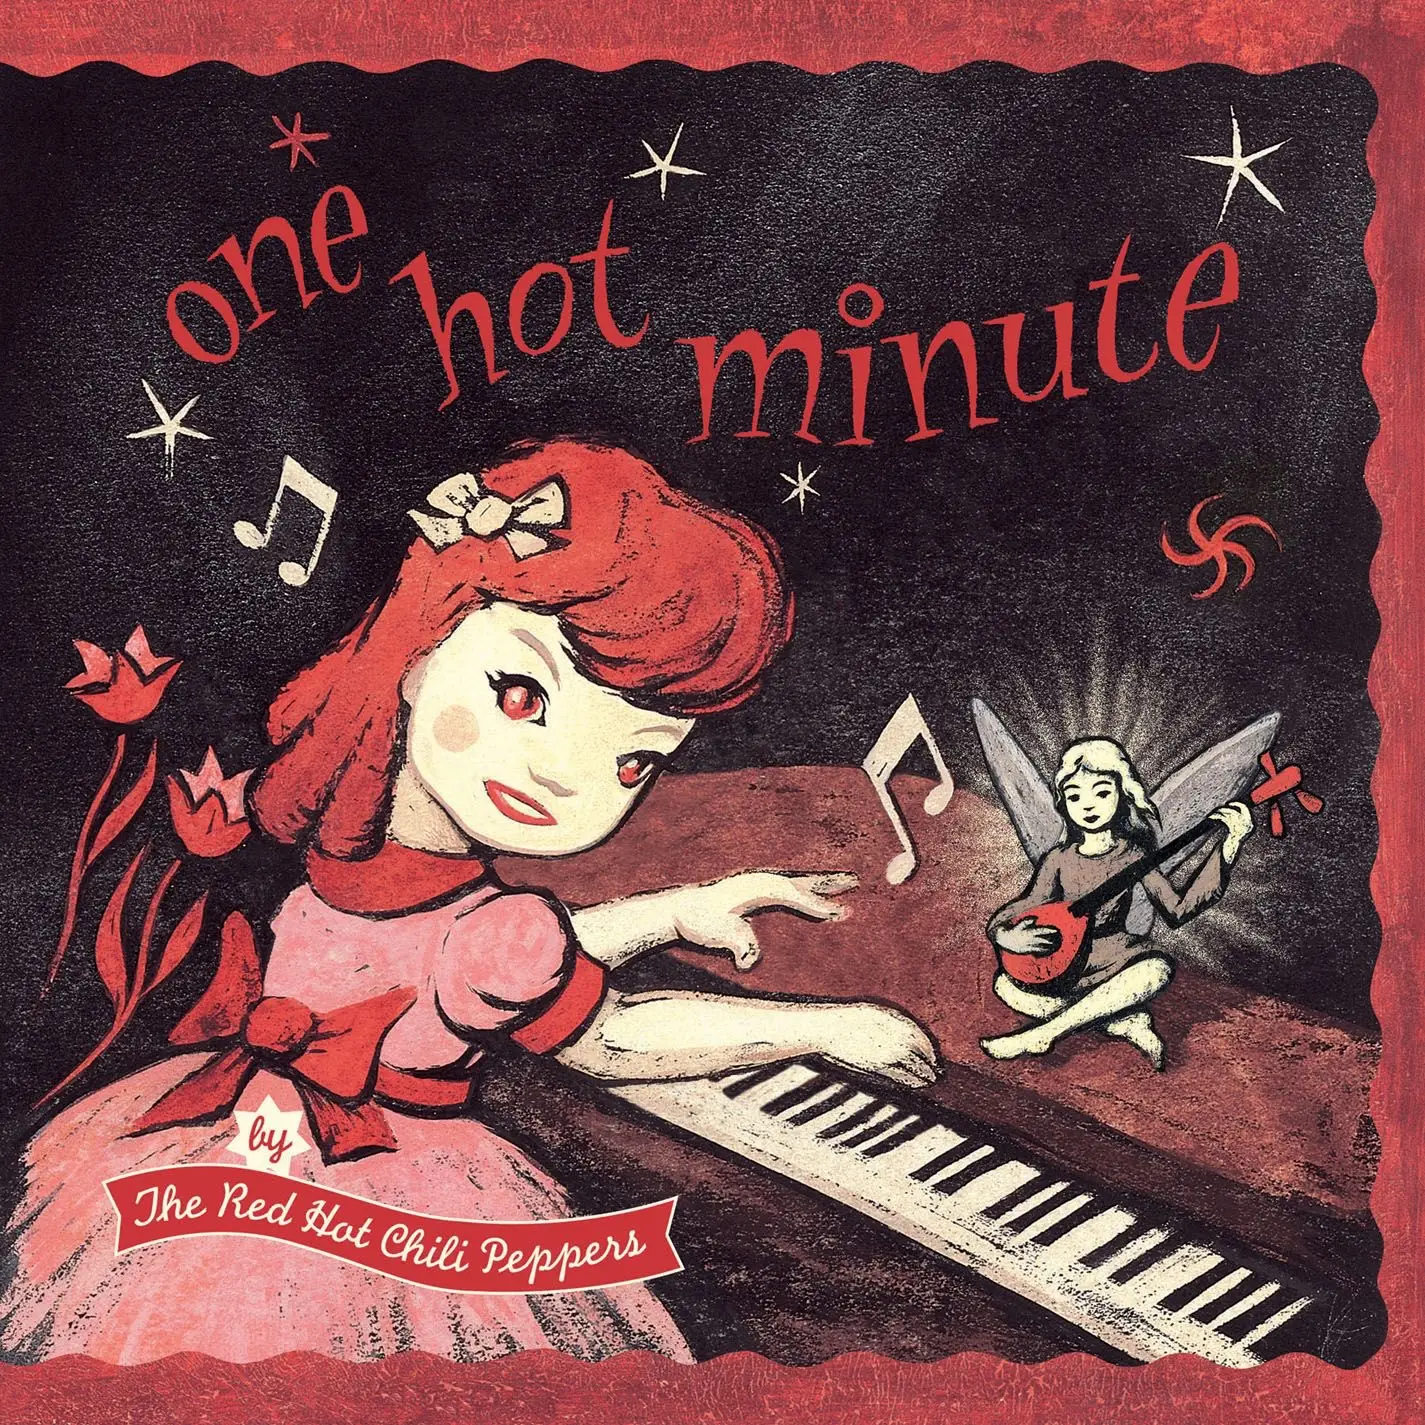 <strong>Red Hot Chili Peppers - One Hot Minute</strong> (Vinyl LP - black)